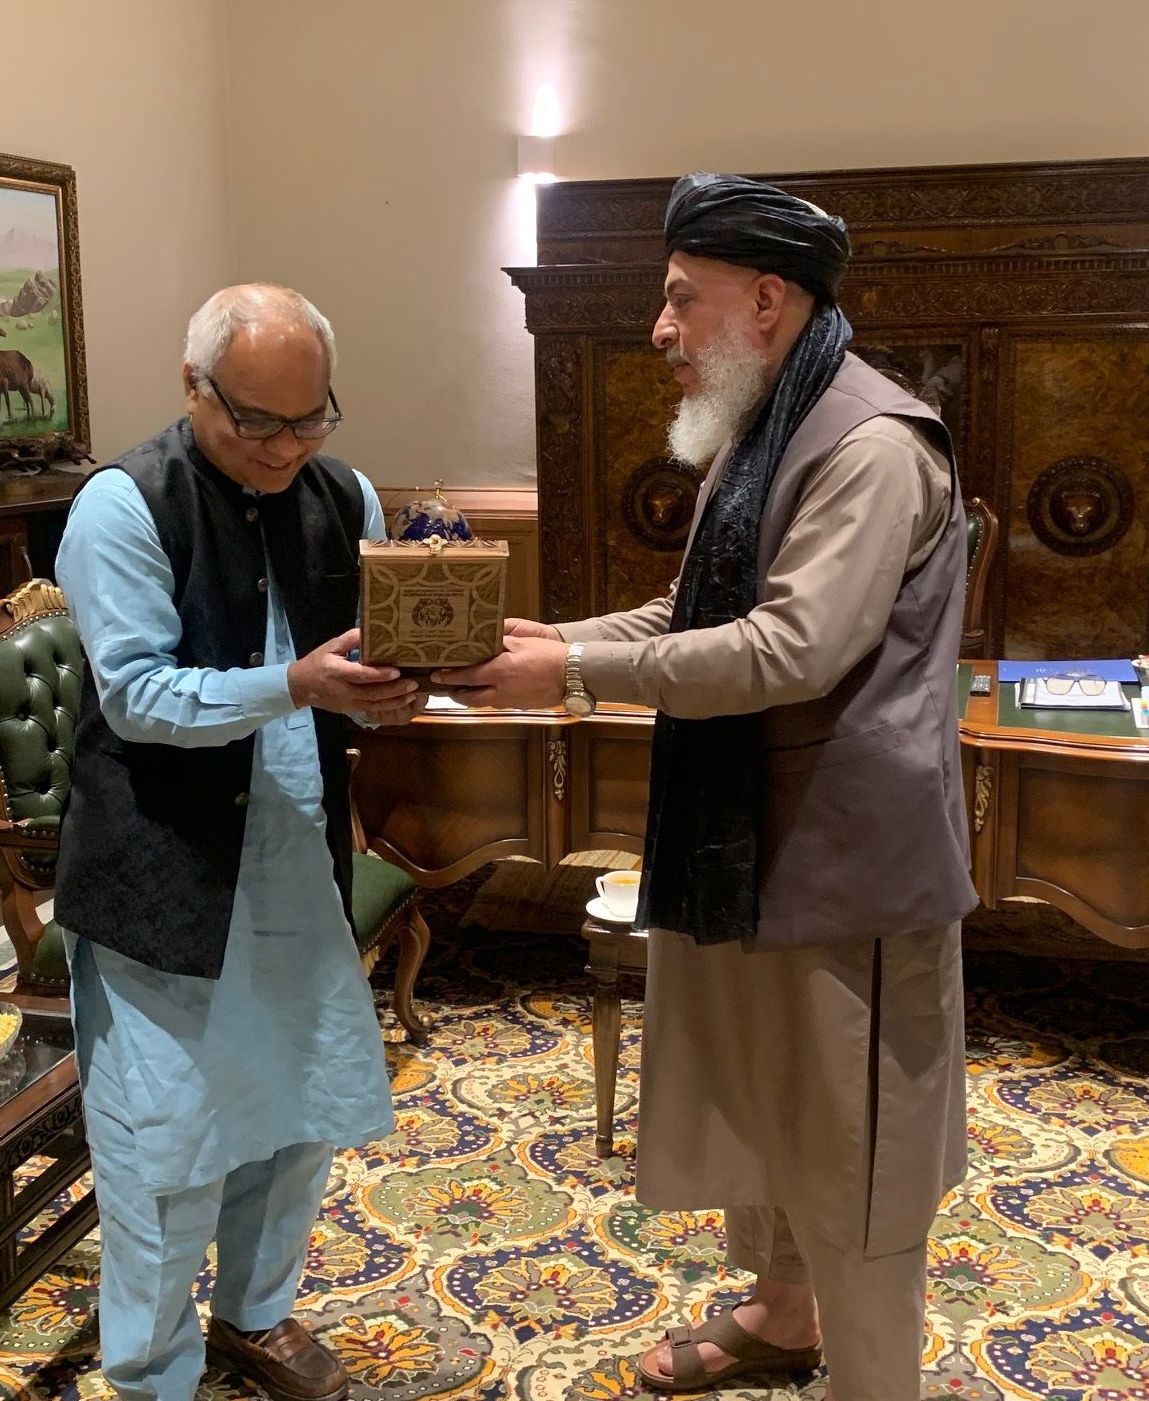 Afghan Deputy Foreign Minister H.E. Sher Mohammad Abbas Stanikzai presenting a gift of a plate of Lapis Lazuli to Kamal Ahmad for AUW as a token of his government's appreciation of AUW's support for Afghan women's education.